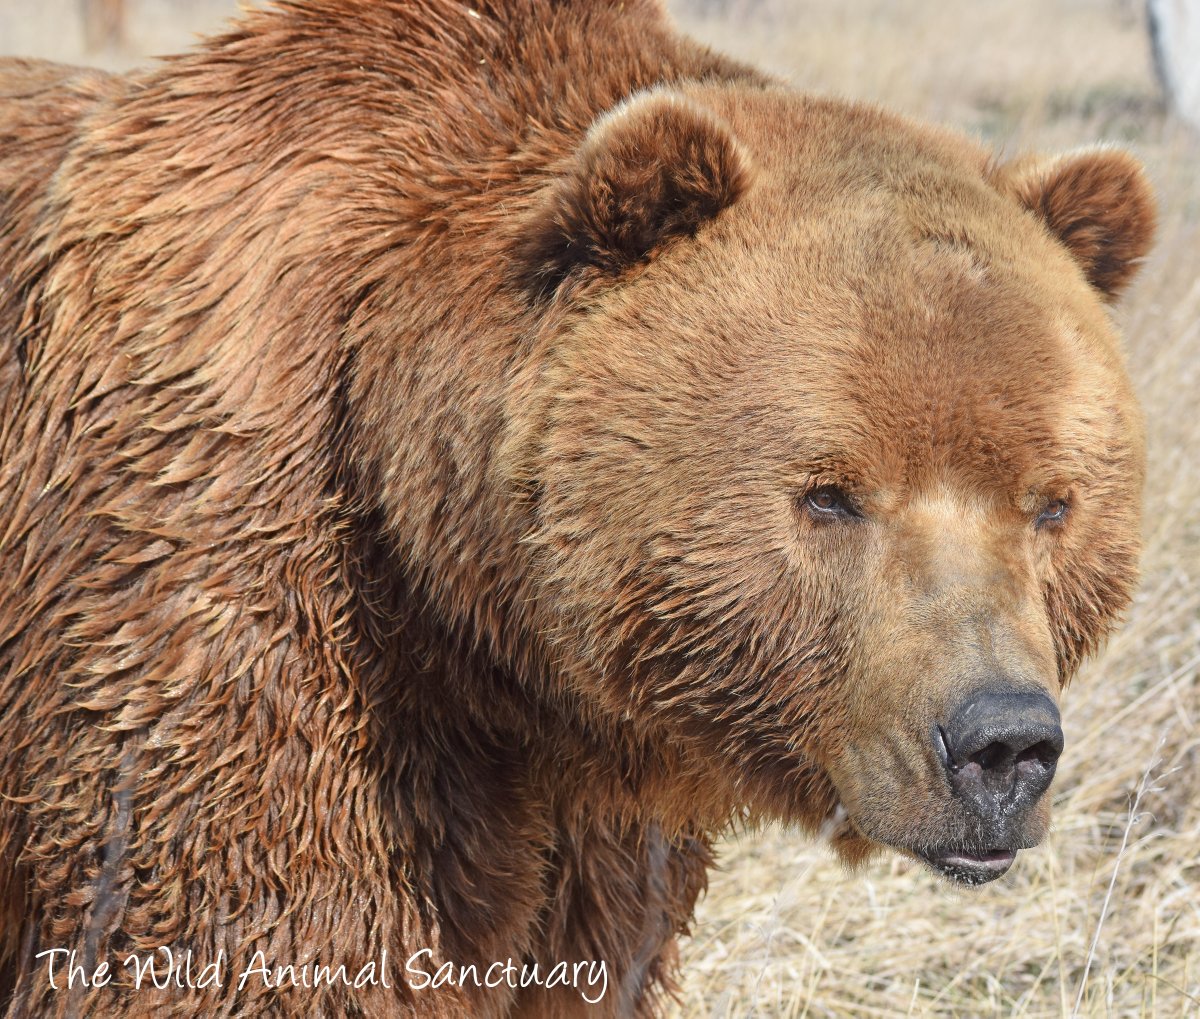 Picture Of The Day!
Location: The Wild Animal Sanctuary, Keenesburg, CO.

Rescue Kodiak Grizzly Bear, Jake, takes a photogenic moment after enjoying a swim in his pool.

#TheWildAnimalSanctuary #wildanimalsanctuary #Colorado #sanctuary #rescuedKodiakGrizzlyBear #GrizzlyBear